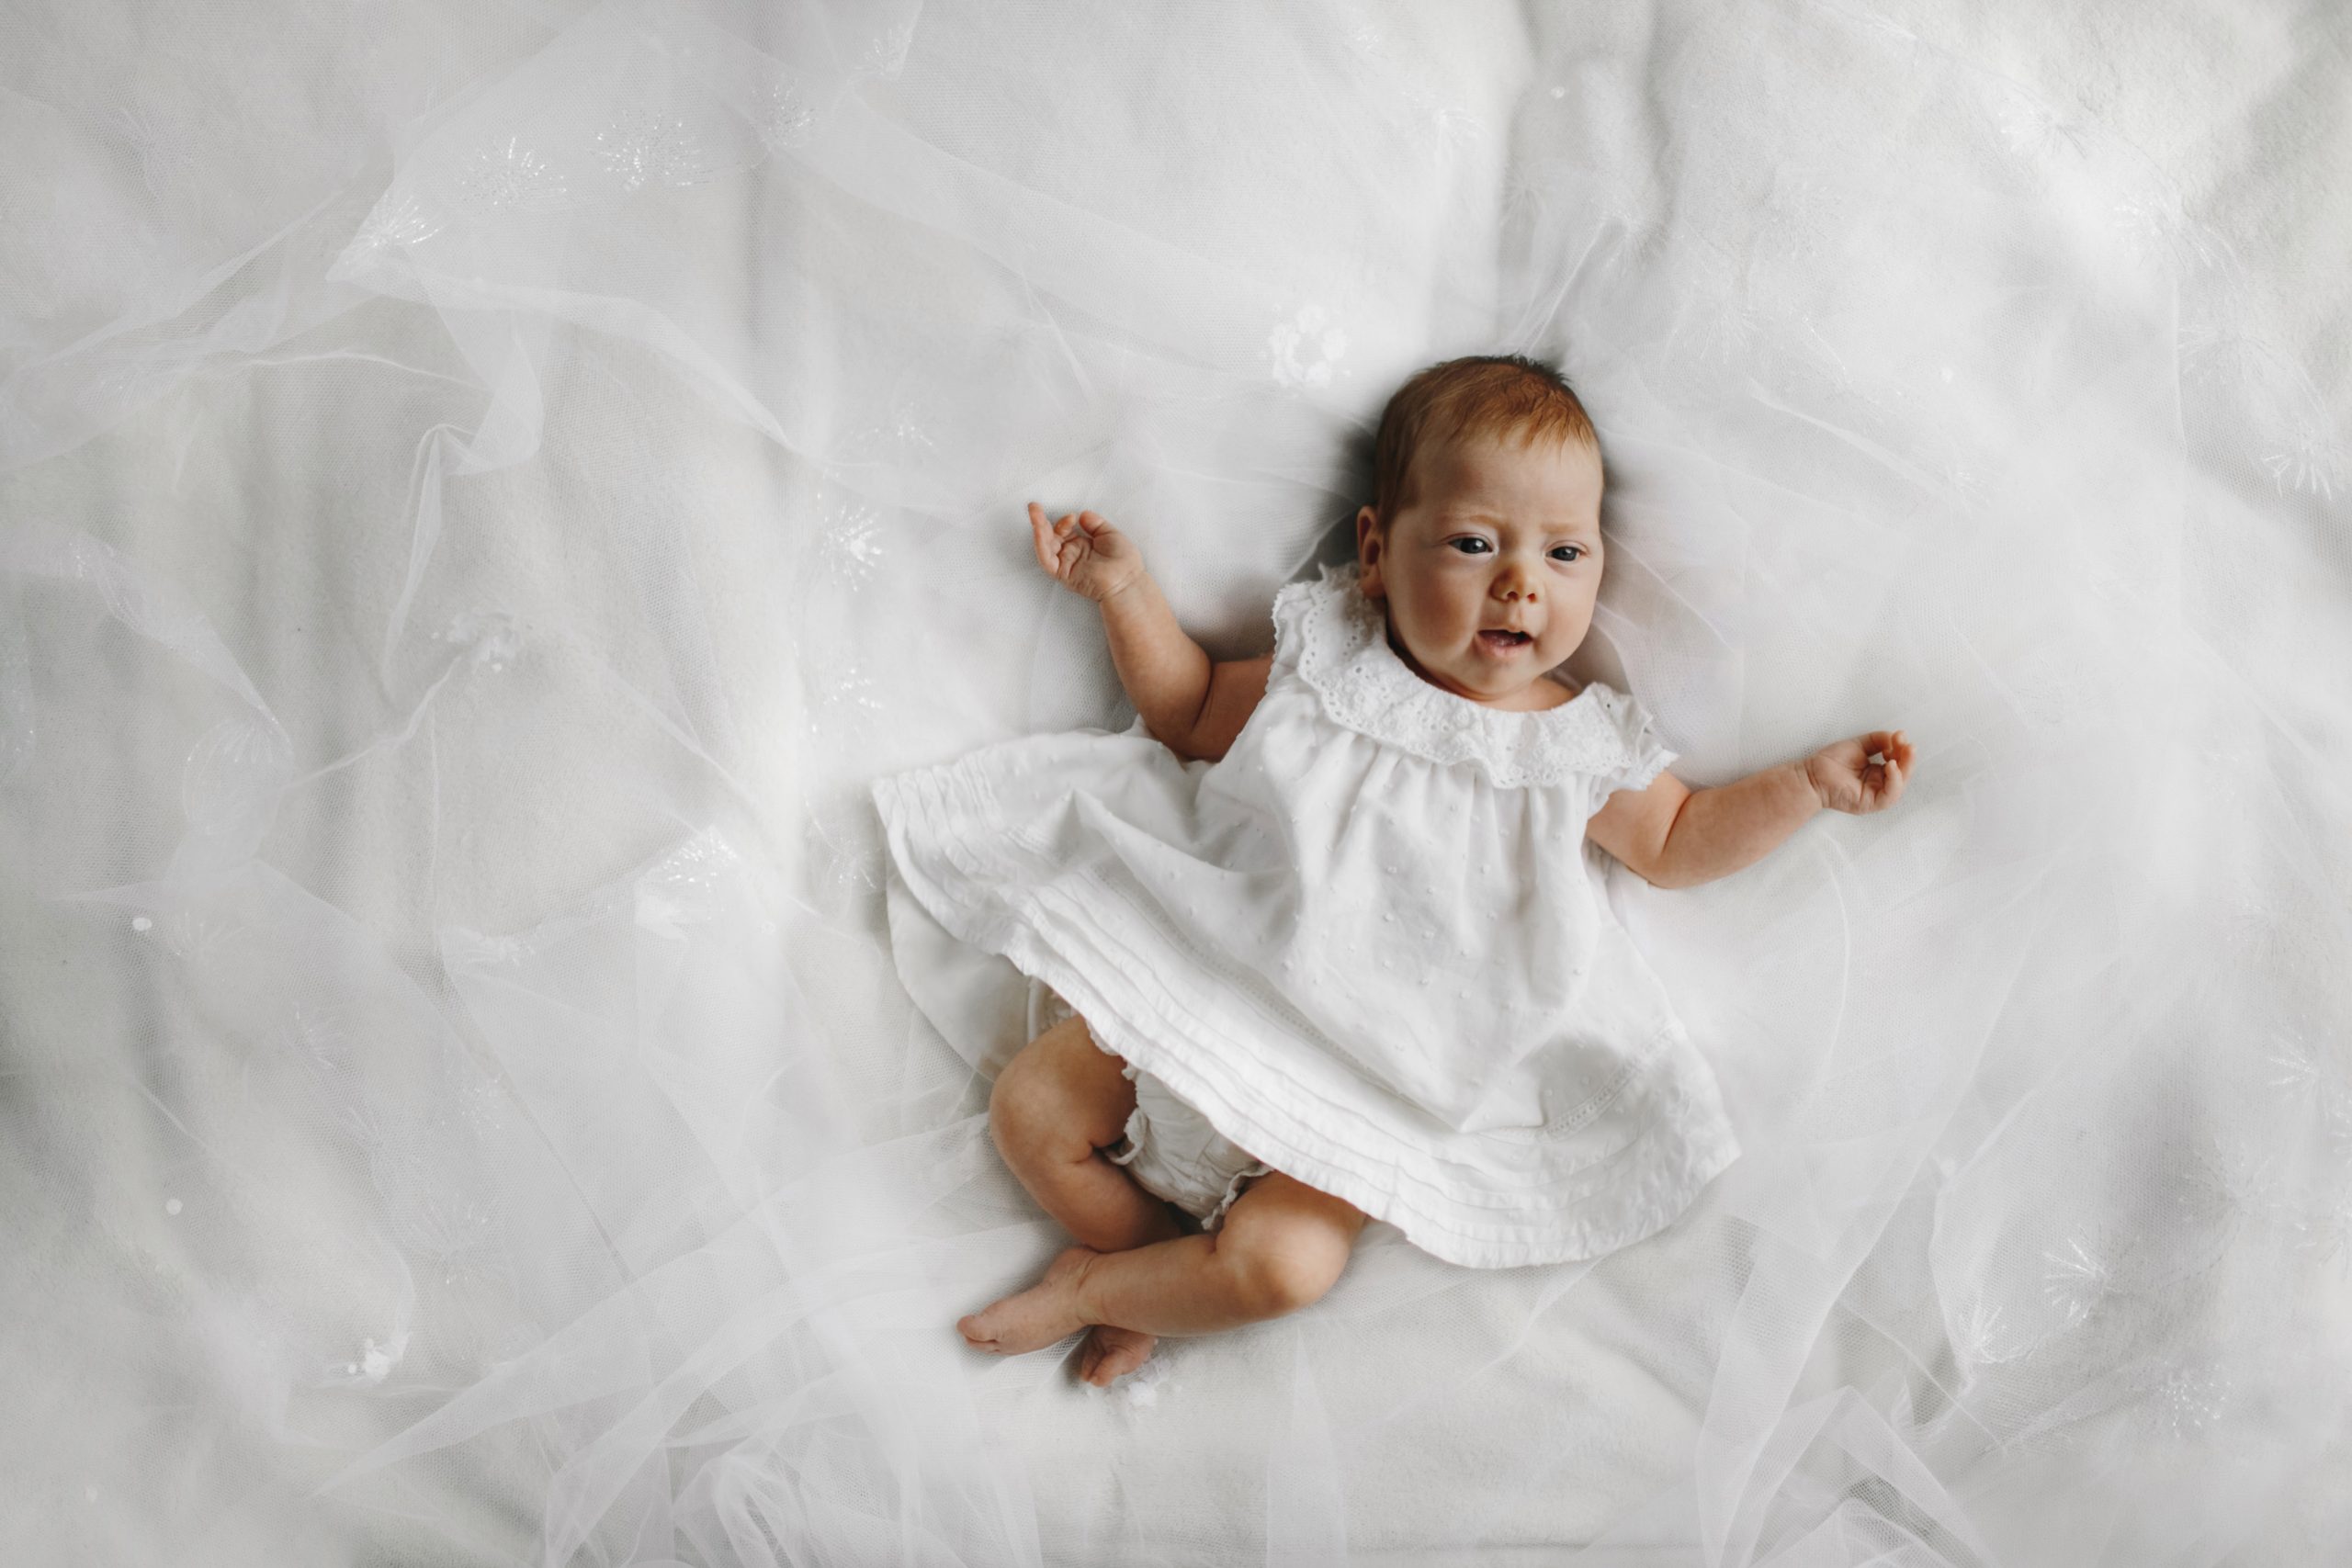 Adorable baby in a white dress lies on a bed